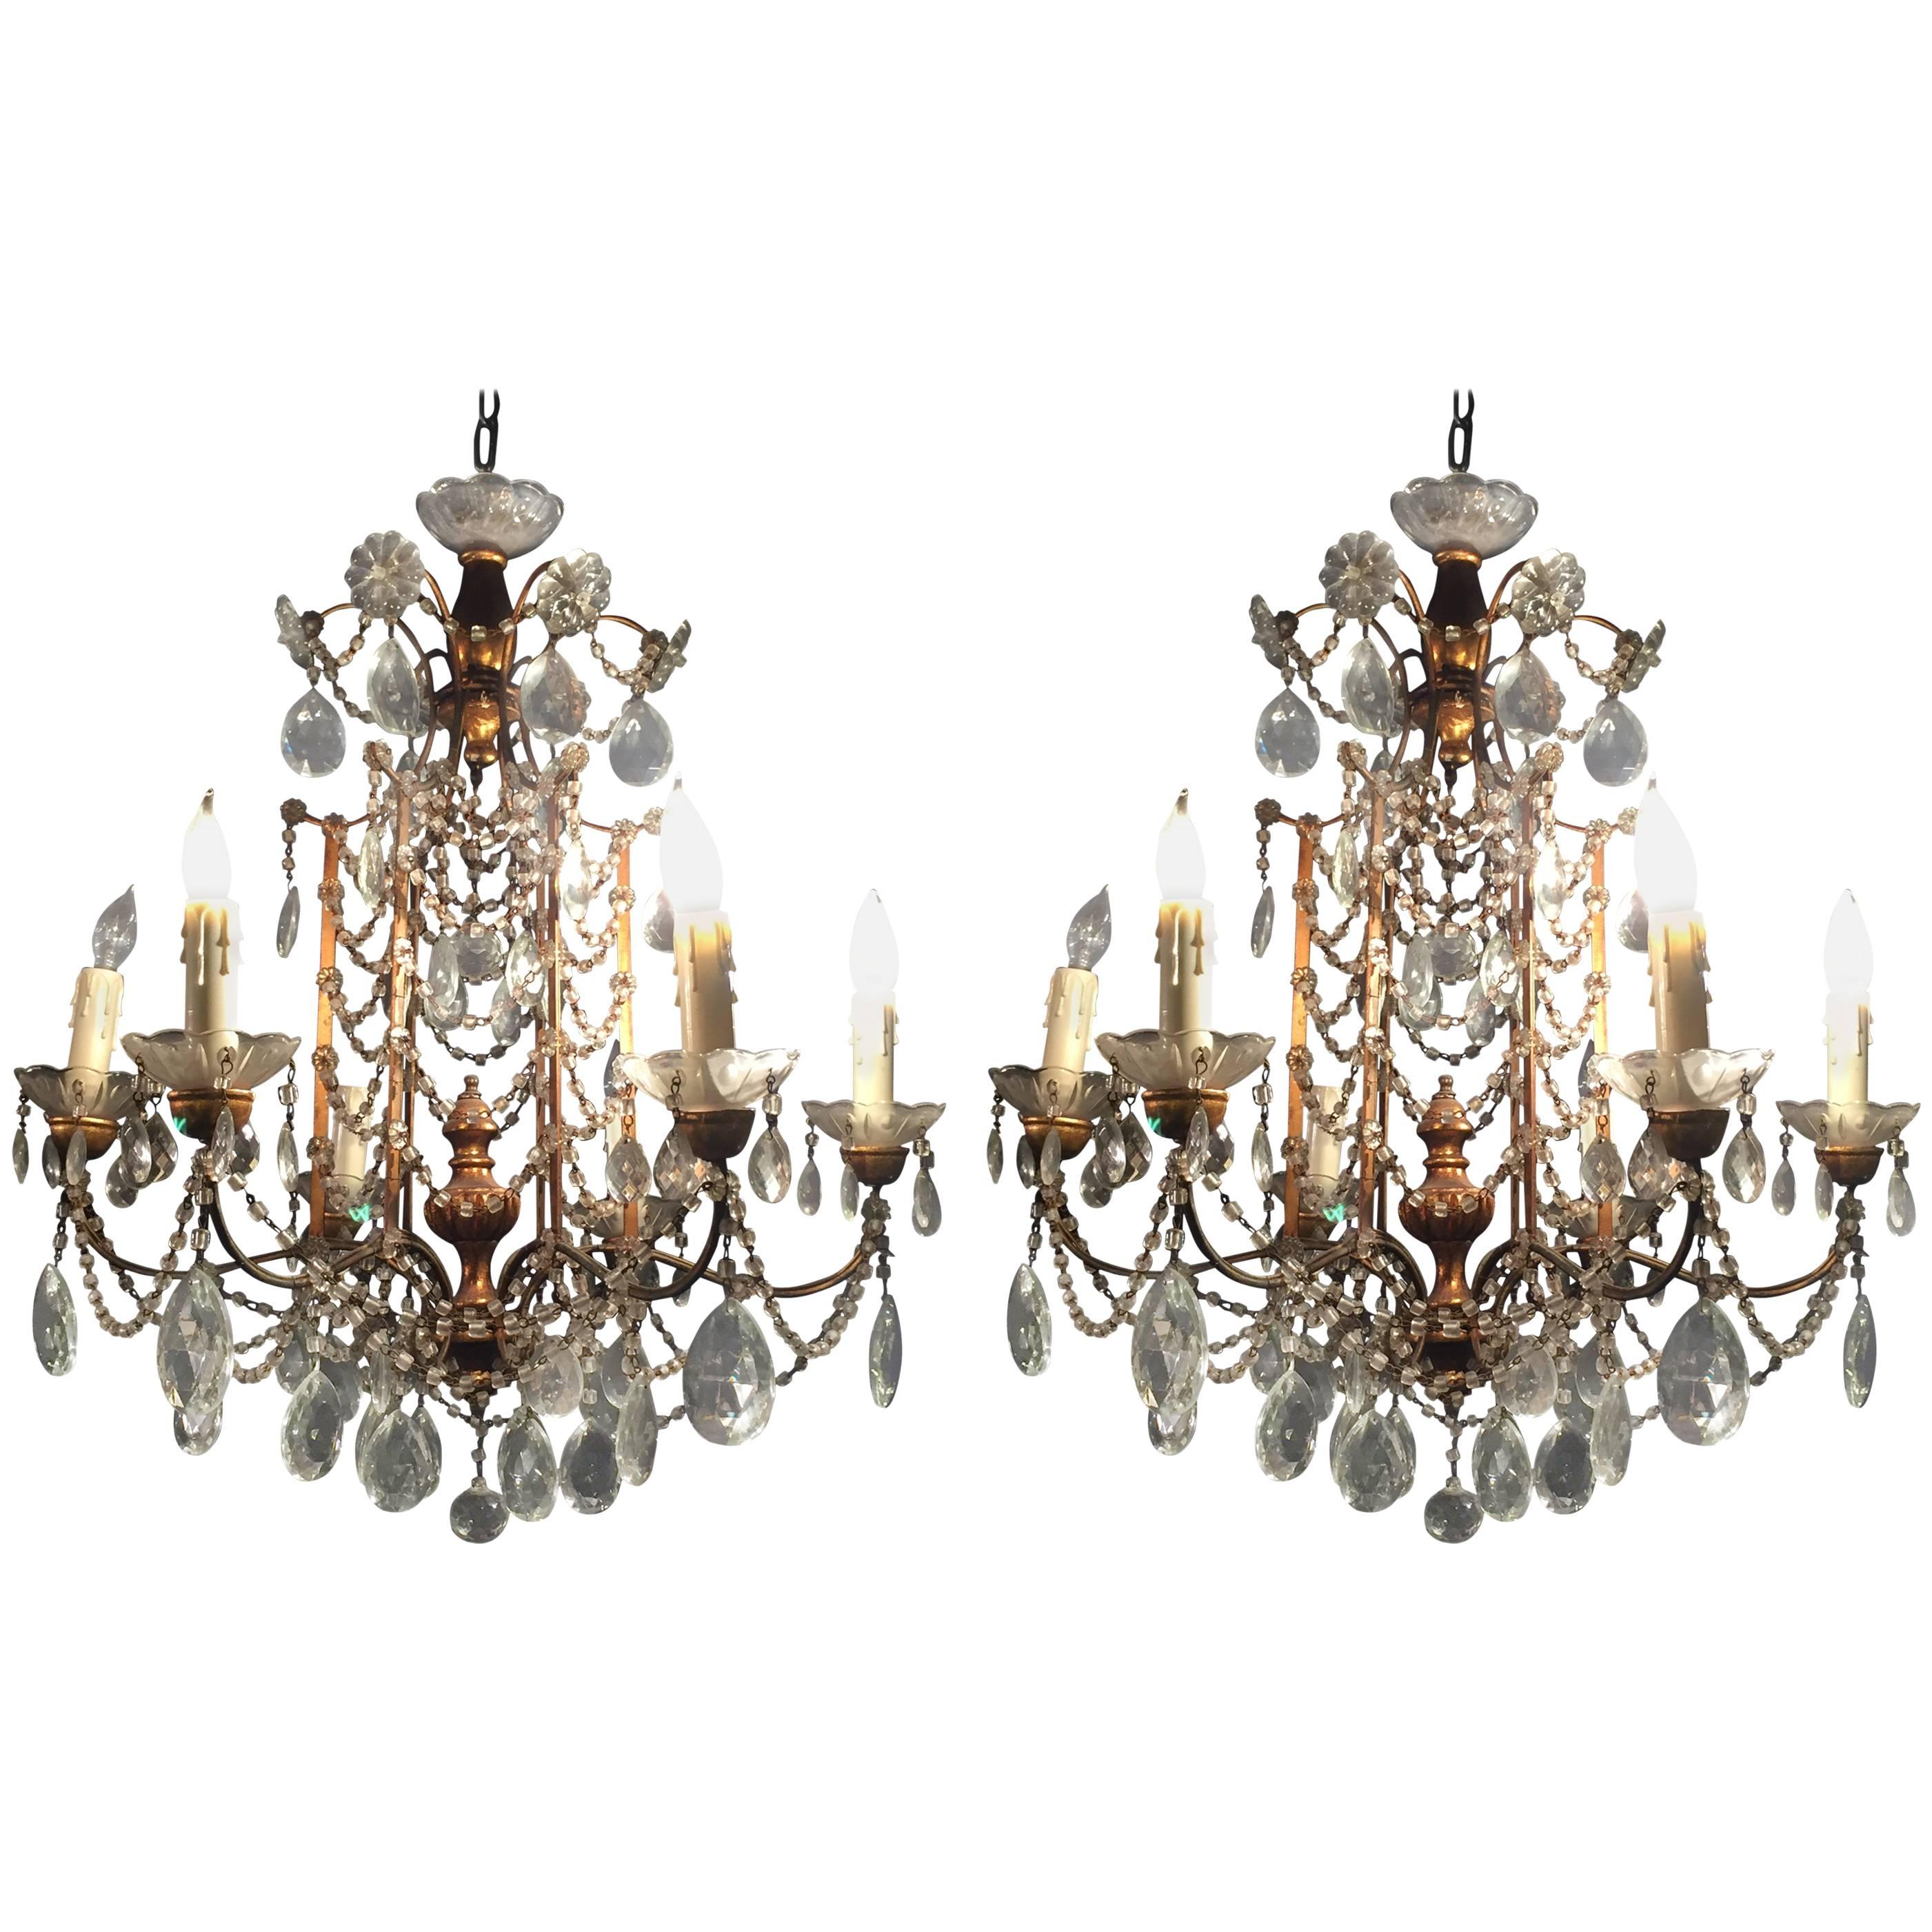 Pair of 1920s Crystal and Gilded Wood Italian Chandeliers